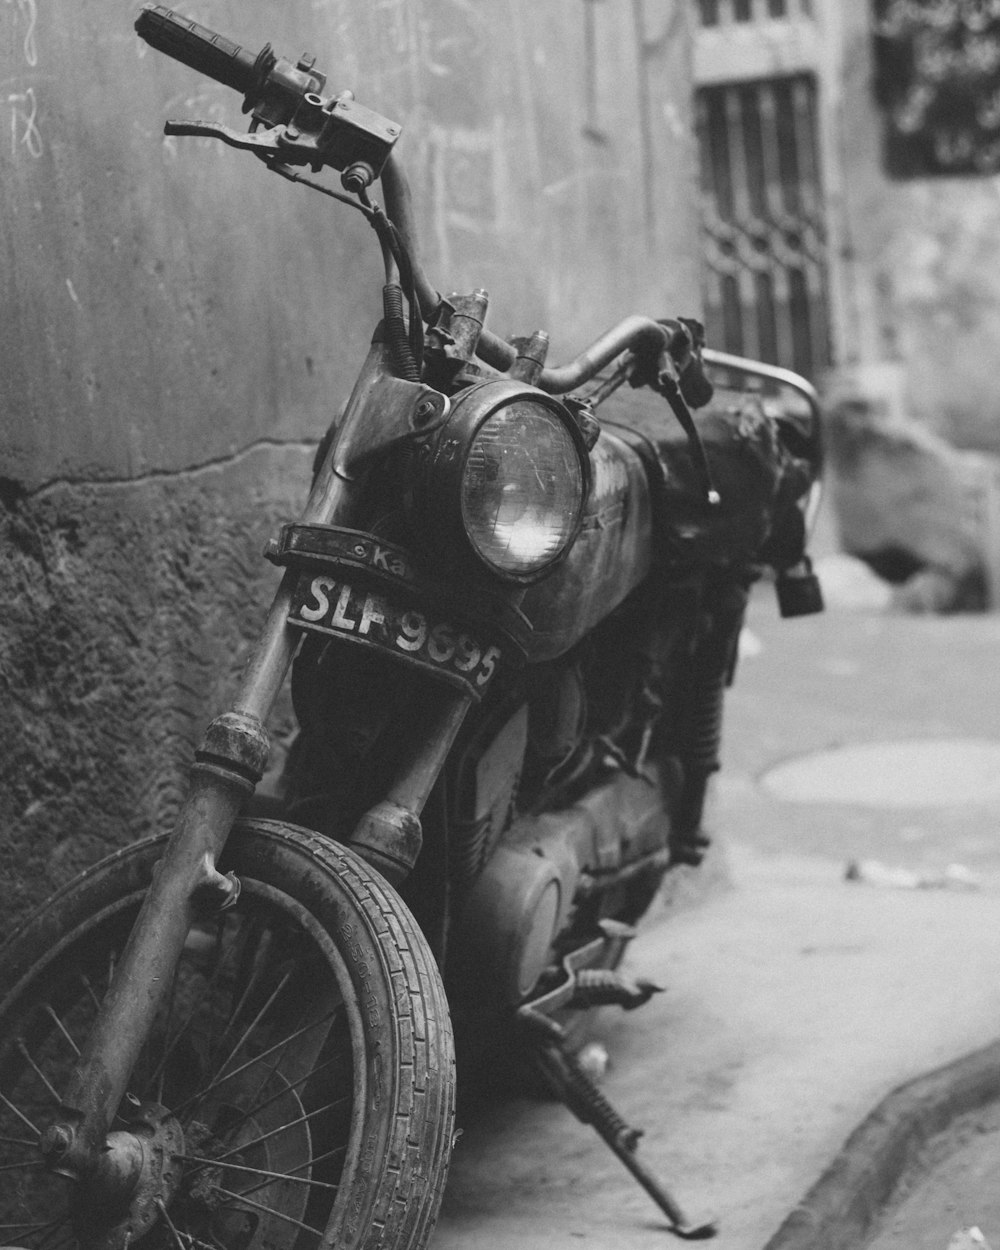 grayscale photography of standard motorcycle